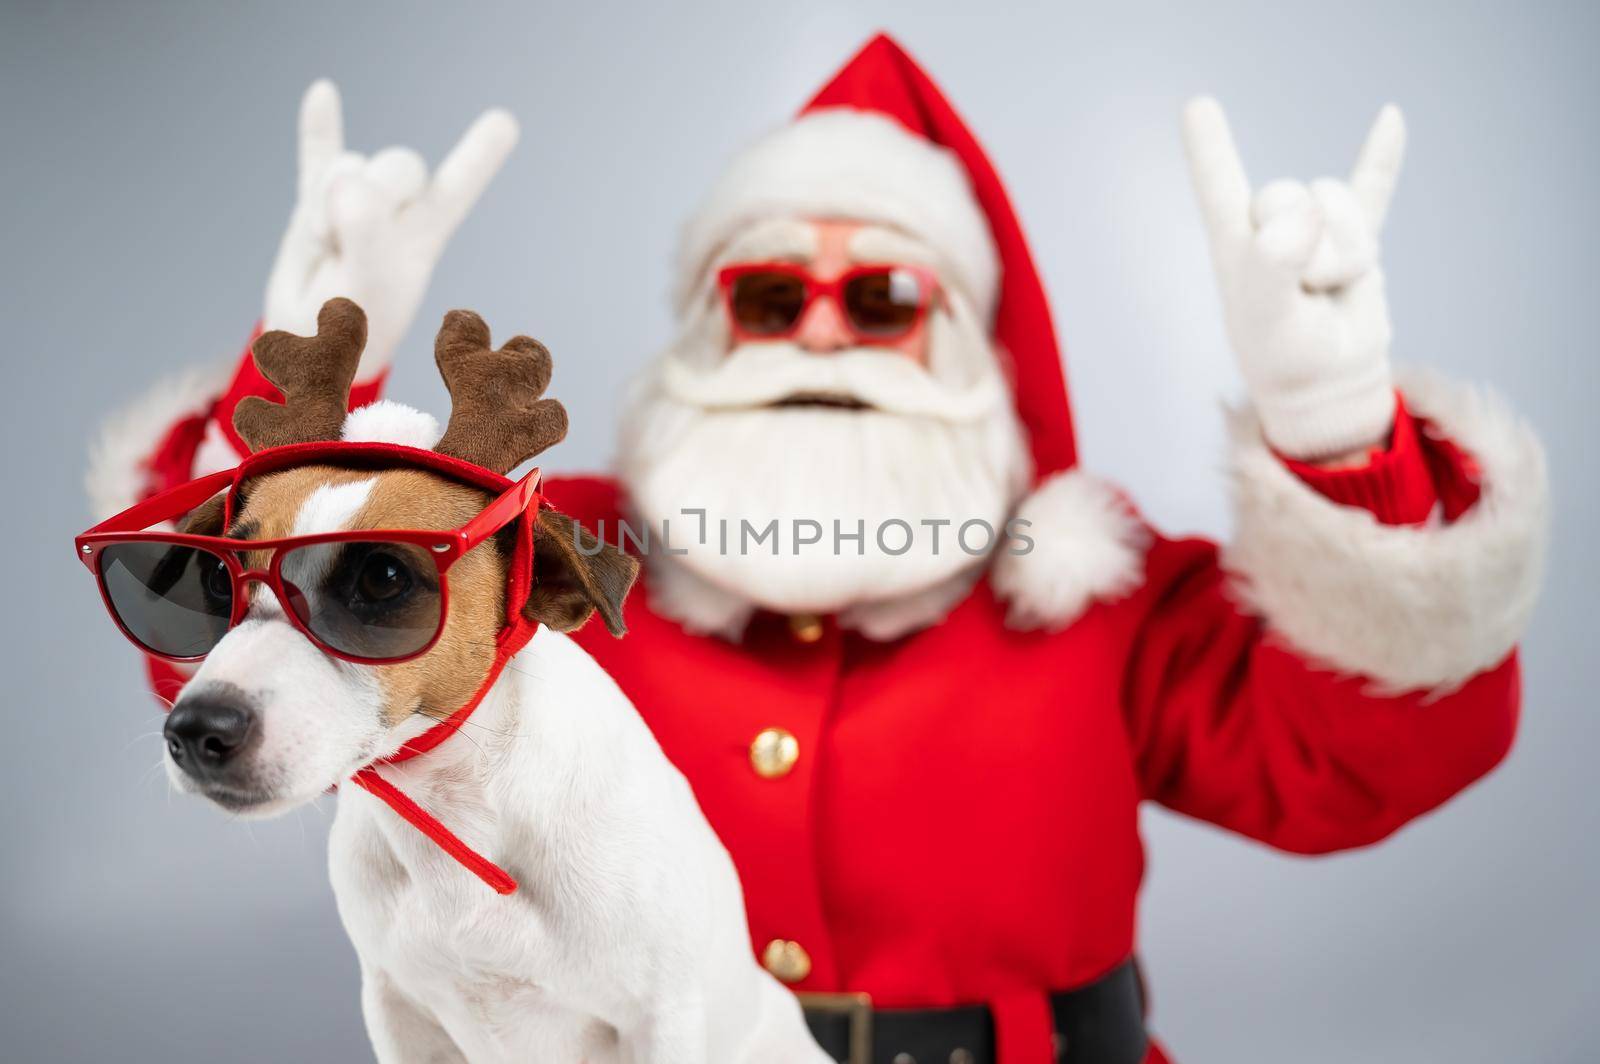 Santa claus and santa's helper in sunglasses on a white background. Jack russell terrier dog in a deer costume by mrwed54